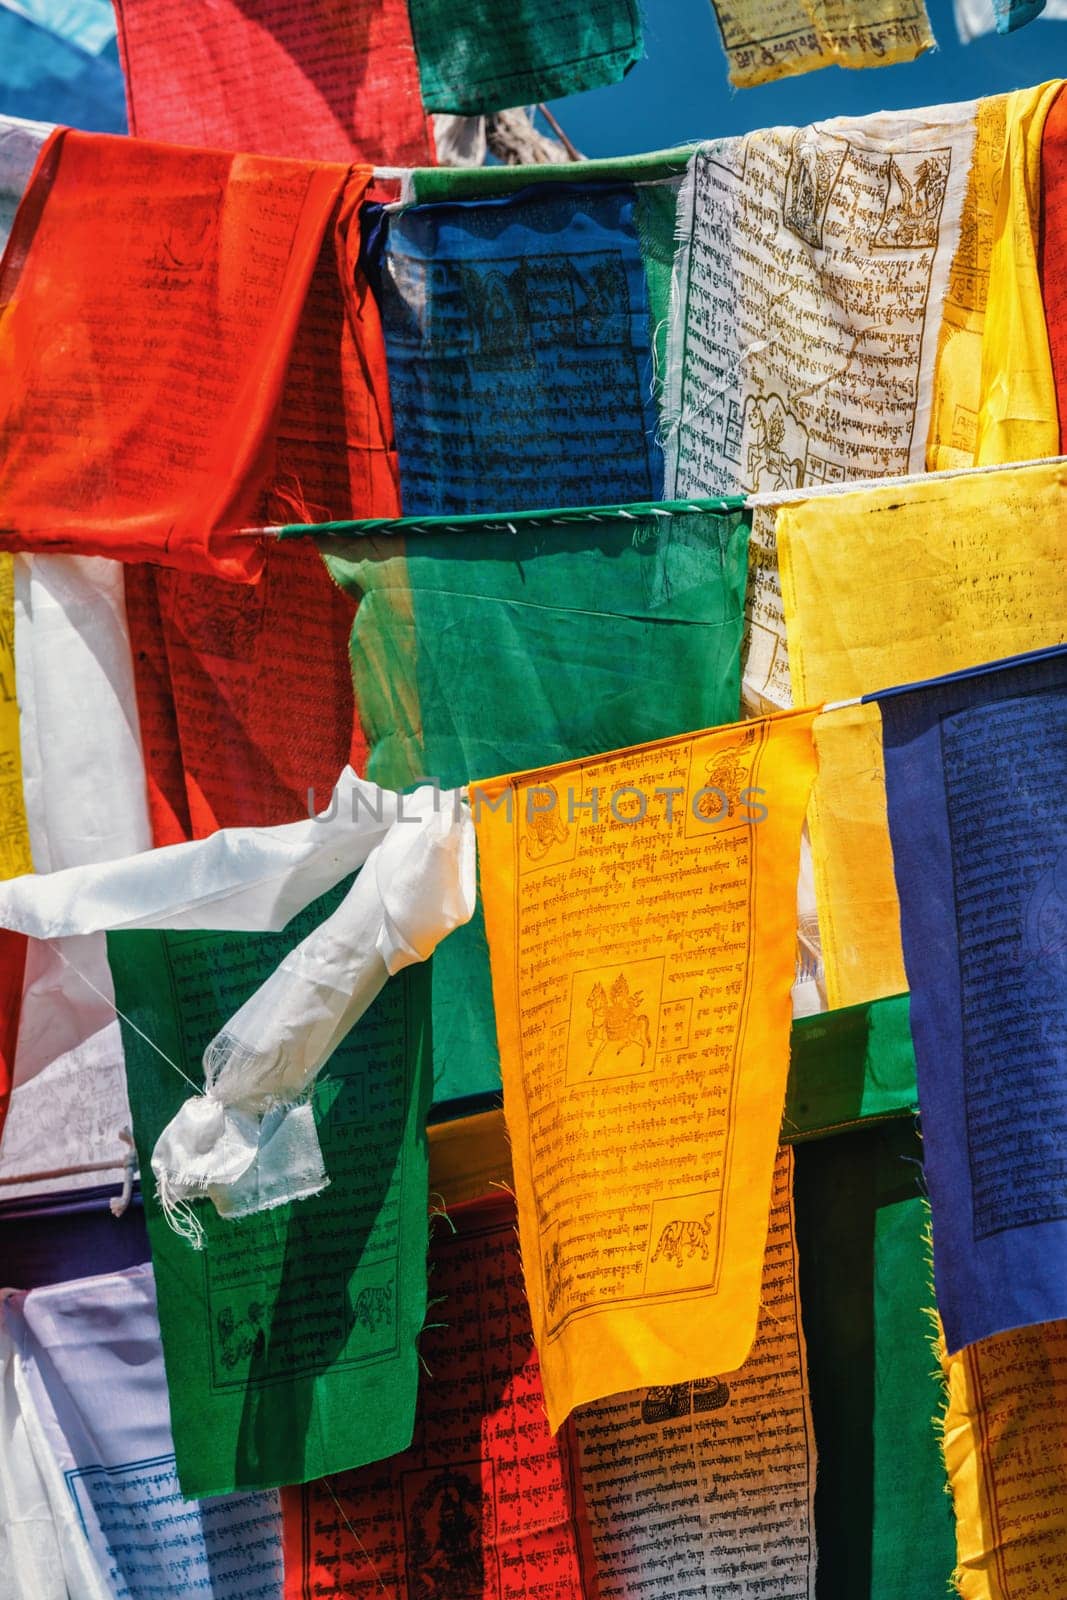 Buddhist prayer flags lungta with Om Mani Padme Hum Buddhist mantra prayer meaning Praise to the Jewel in the Lotus on kora around Tsuglagkhang complex. McLeod Ganj, Himachal Pradesh, India